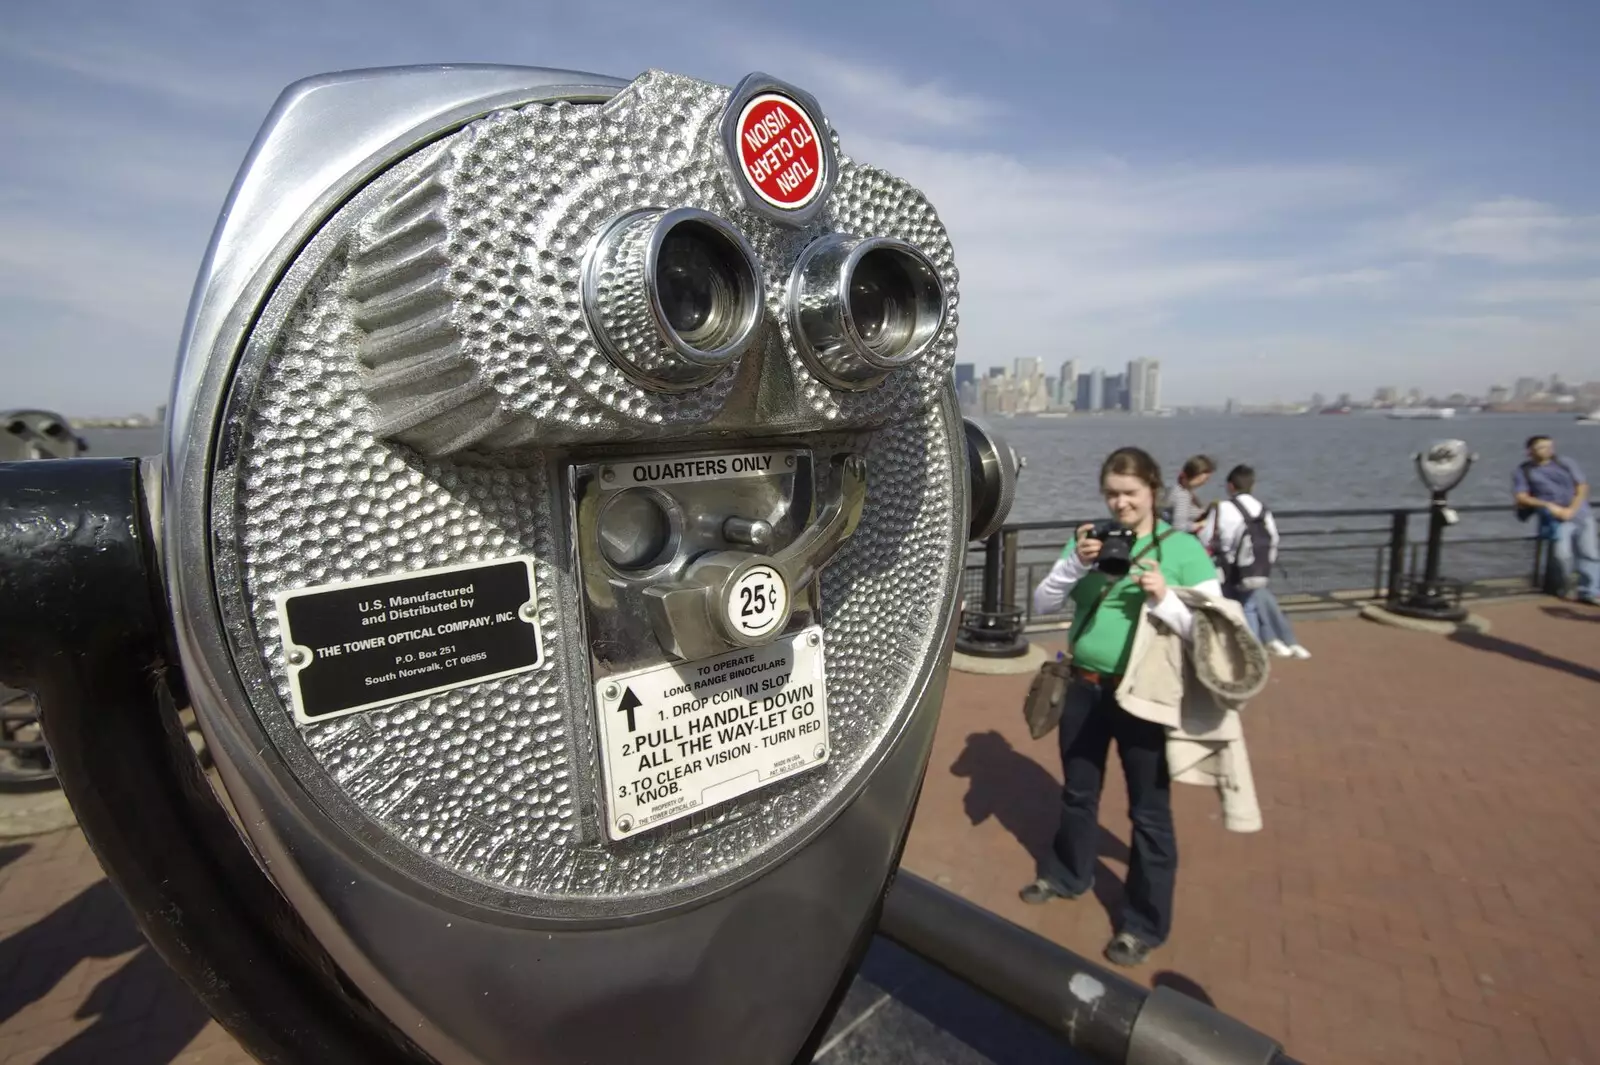 A 25c telescope, from Liberty Island, A Helicopter Trip and Madison Square Basketball, New York, US - 27th March 2007